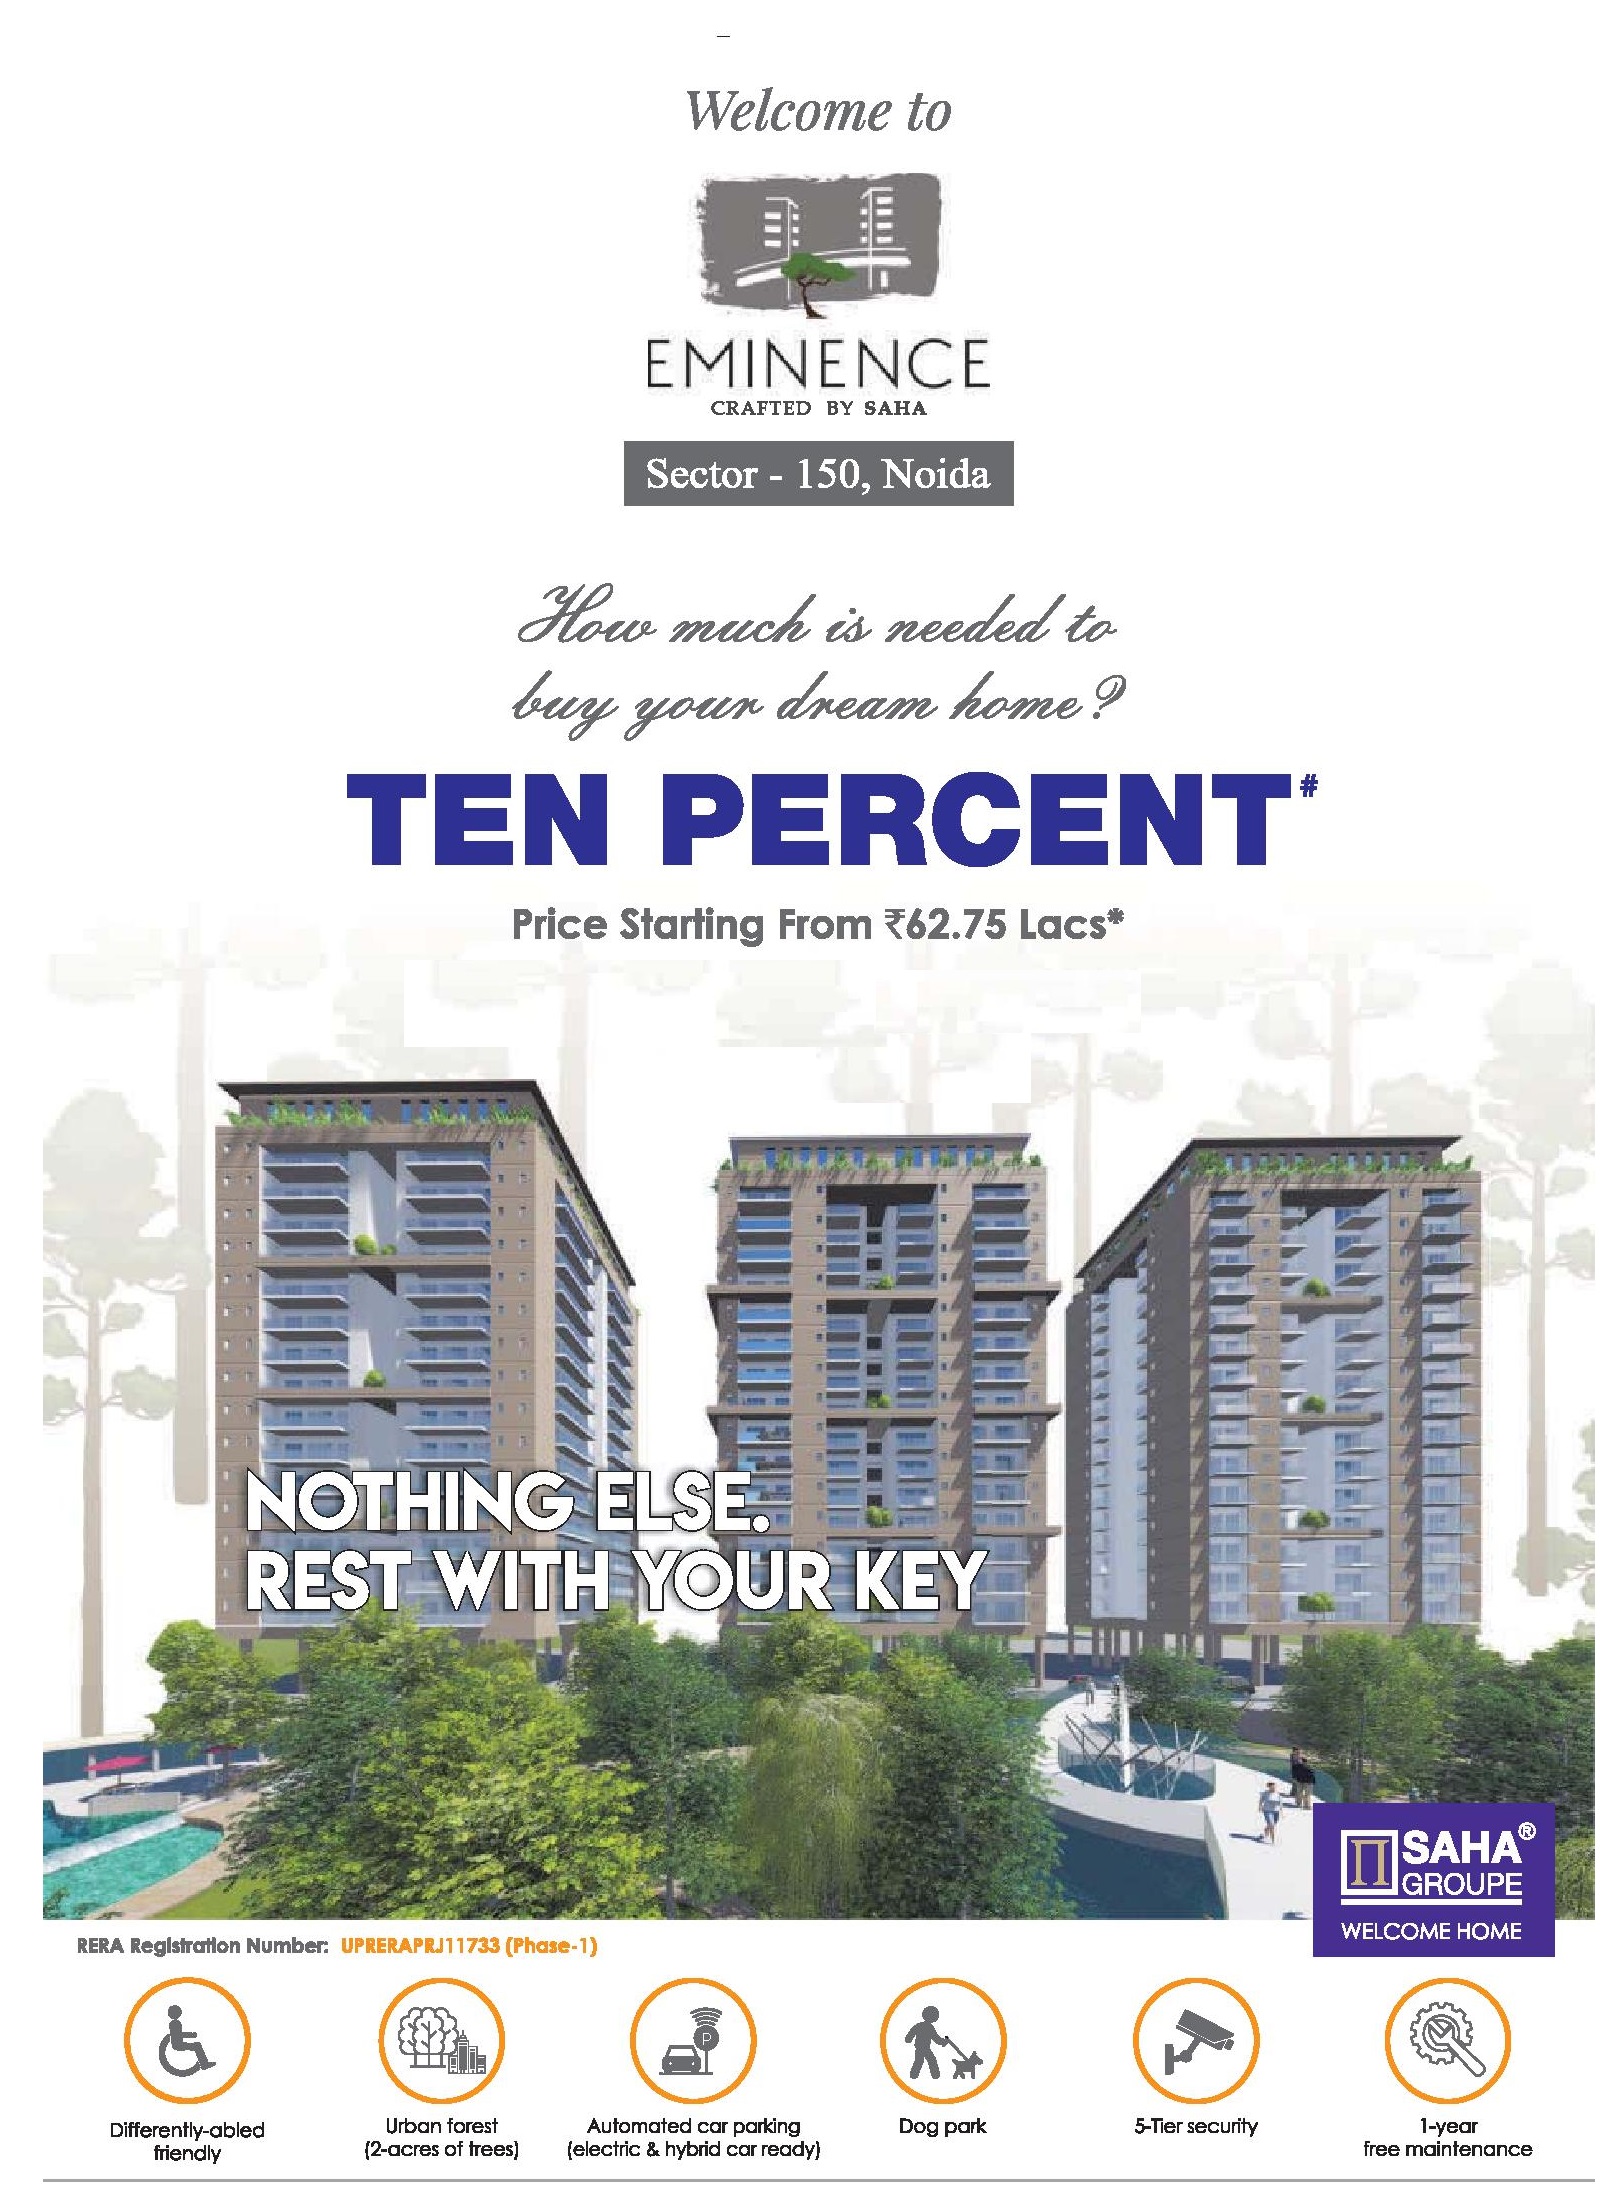 Avail 2/3 bhk at Rs 62.75 lakhs at Saha Eminence in Noida Update